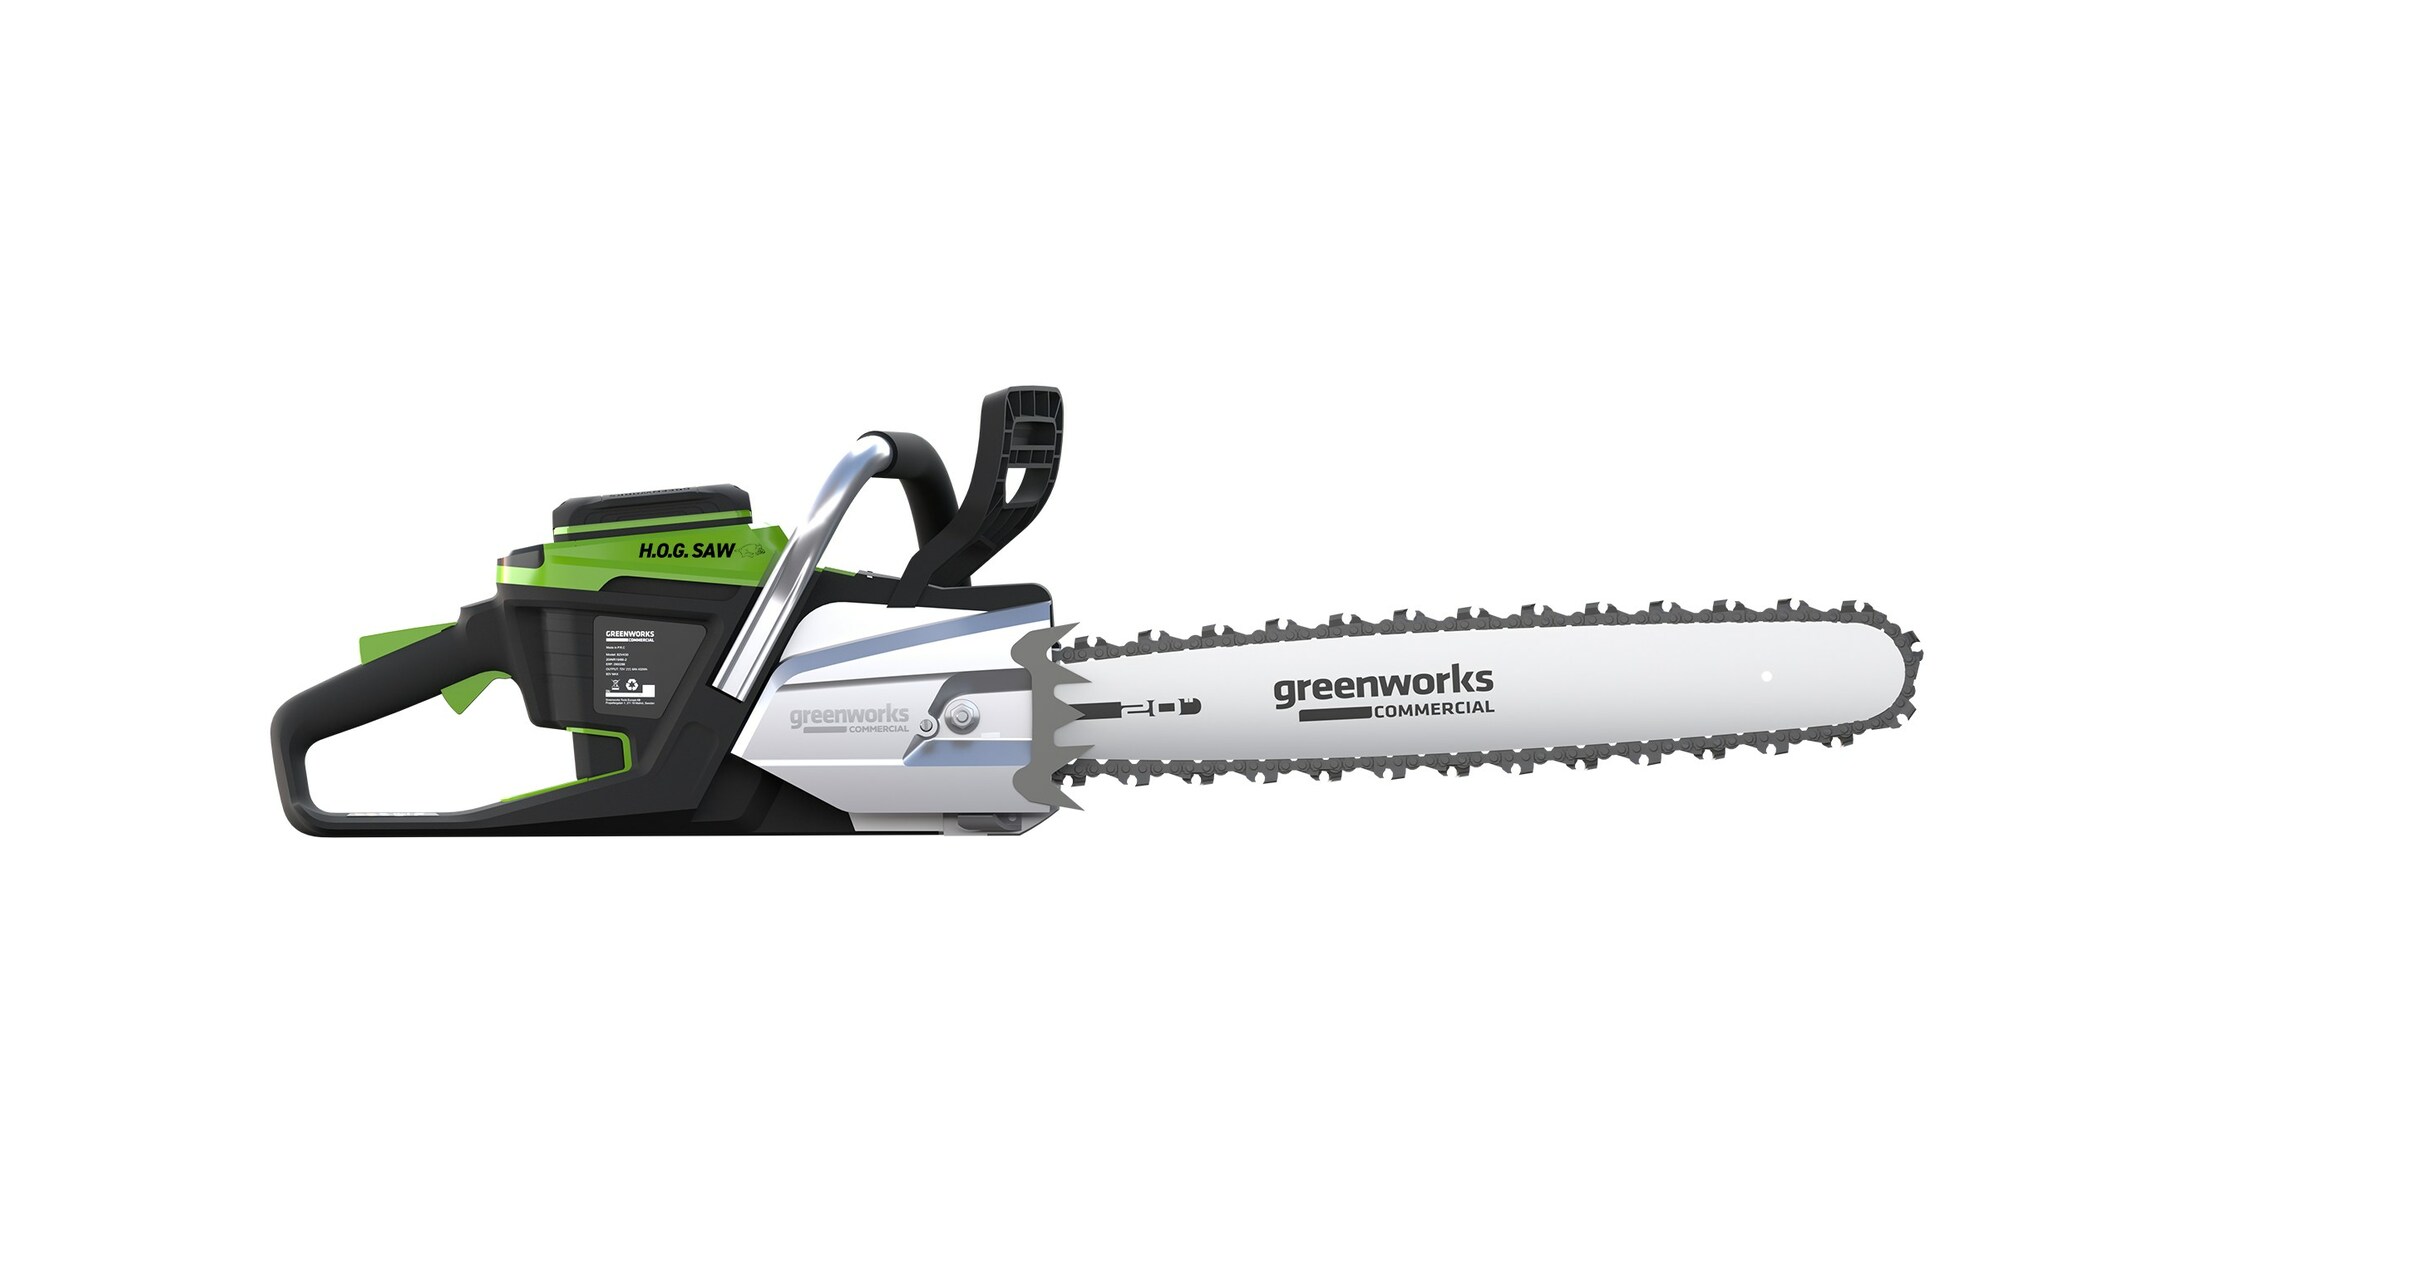 Greenworks Revolutionizes the World of Chainsaws with the First Ever H.O.G.  Saw